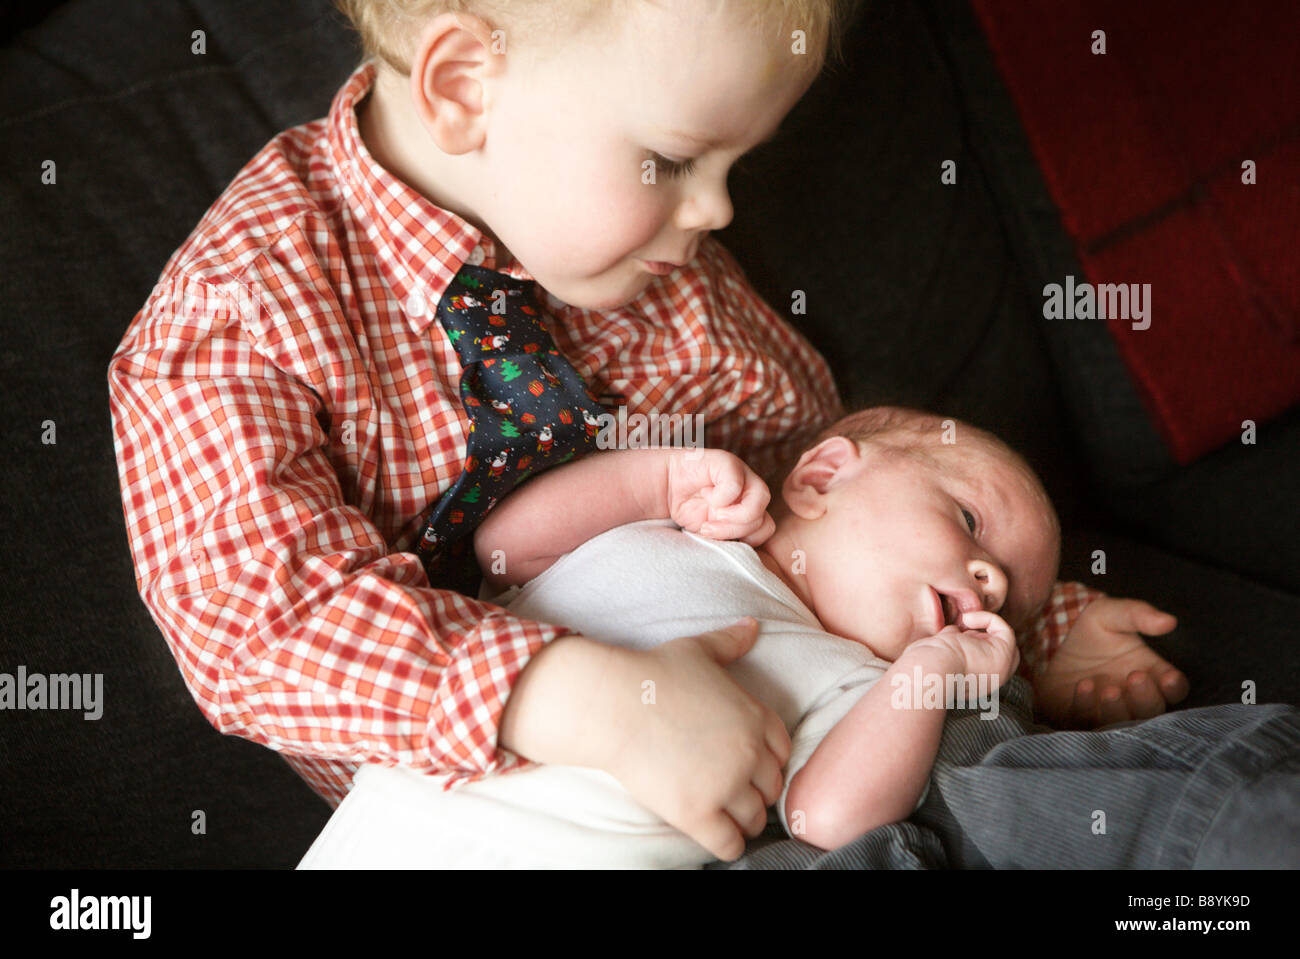 A little boy holding a baby. Stock Photo